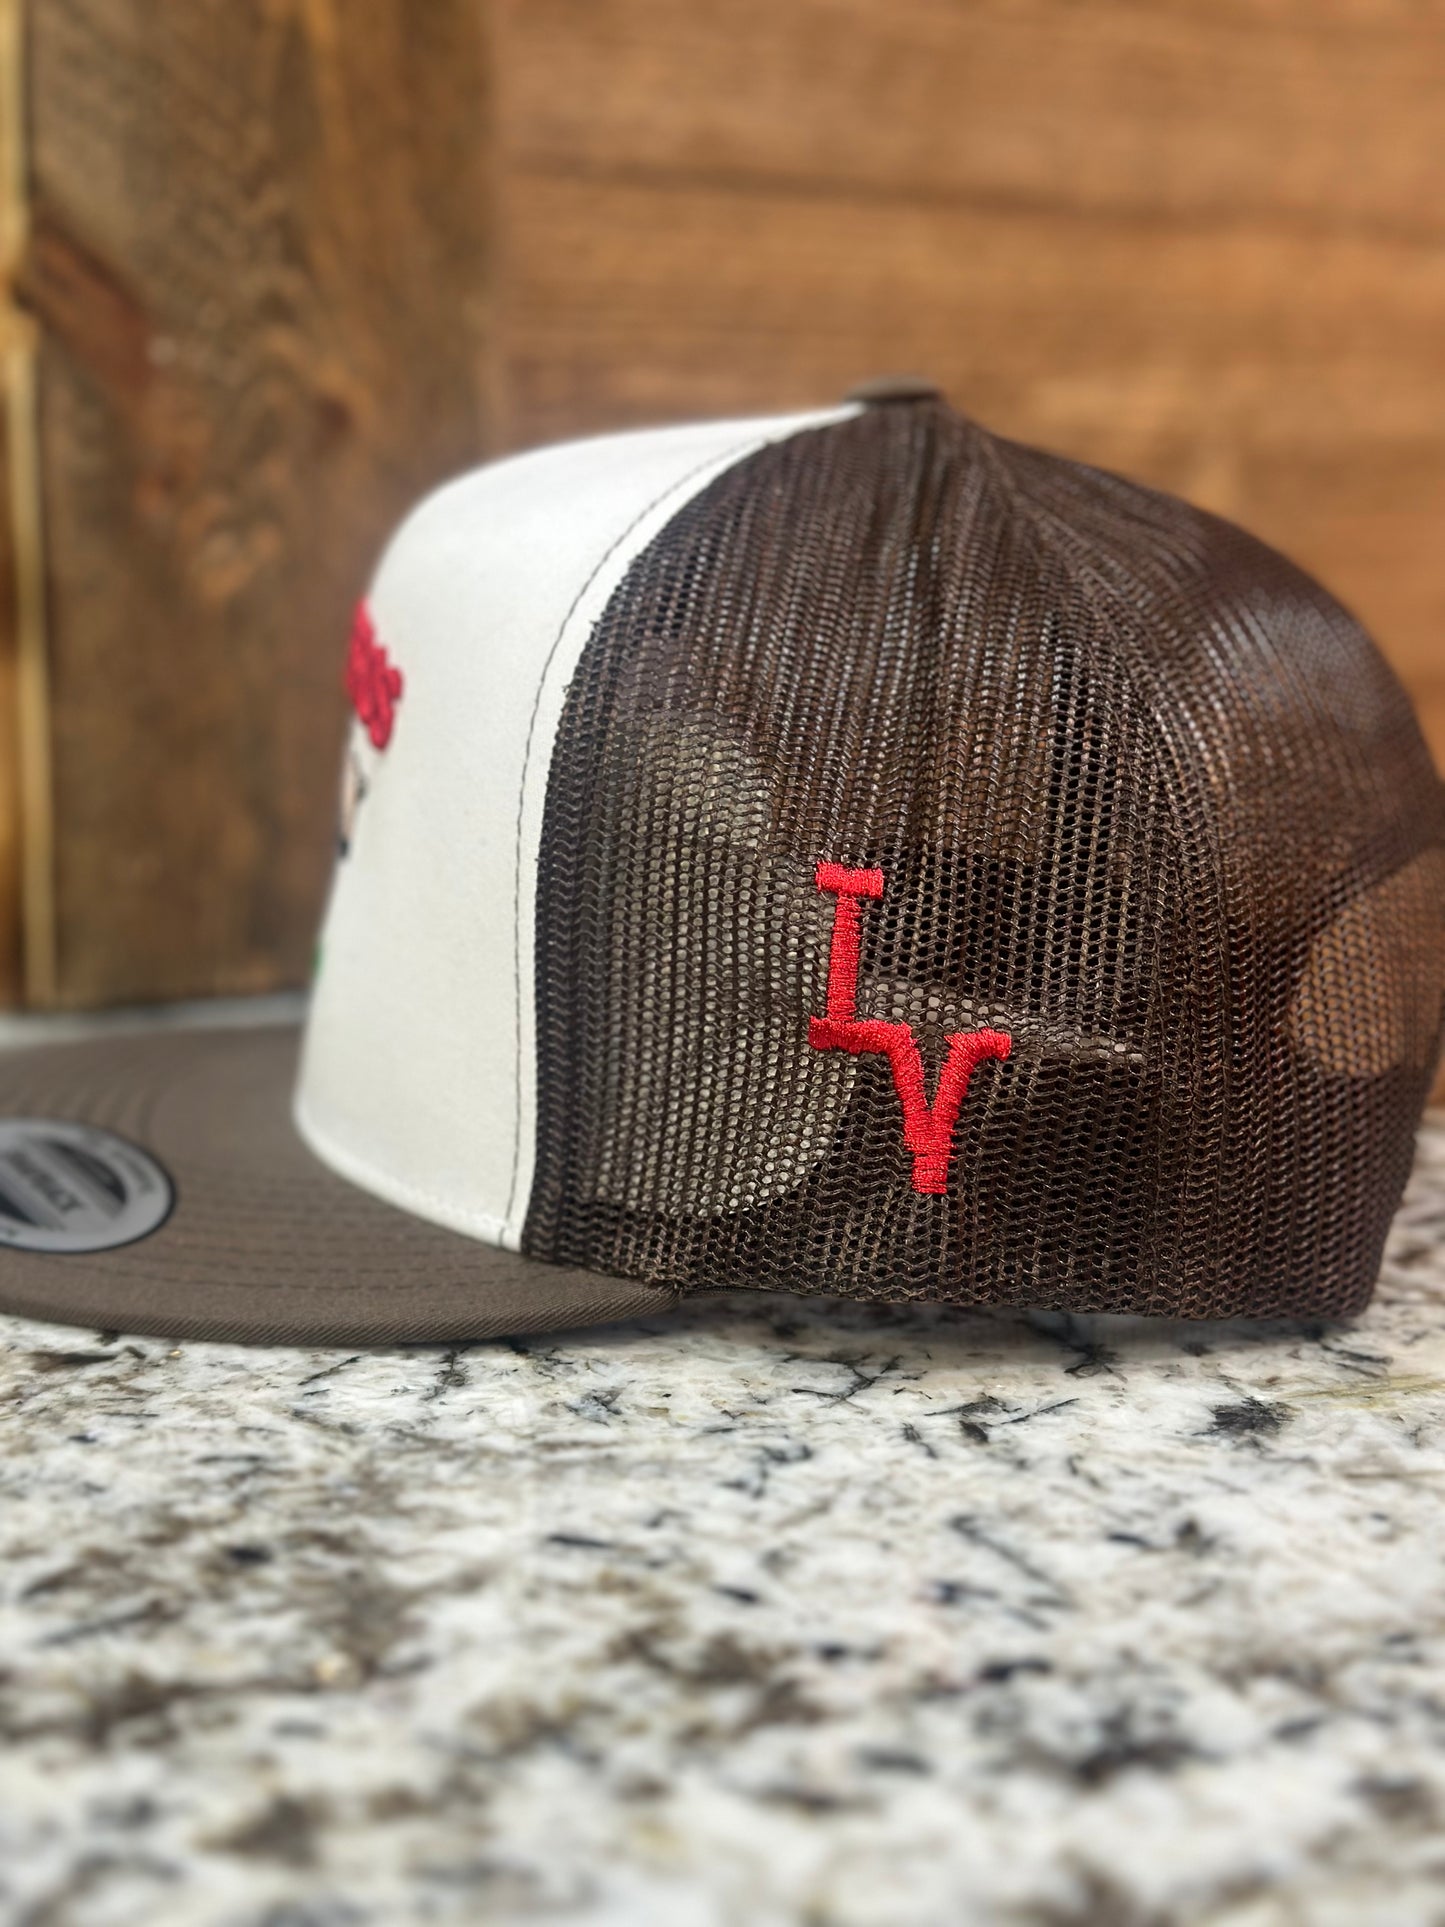 Los Vaqueros Charolais Snapback White/Brown with Red